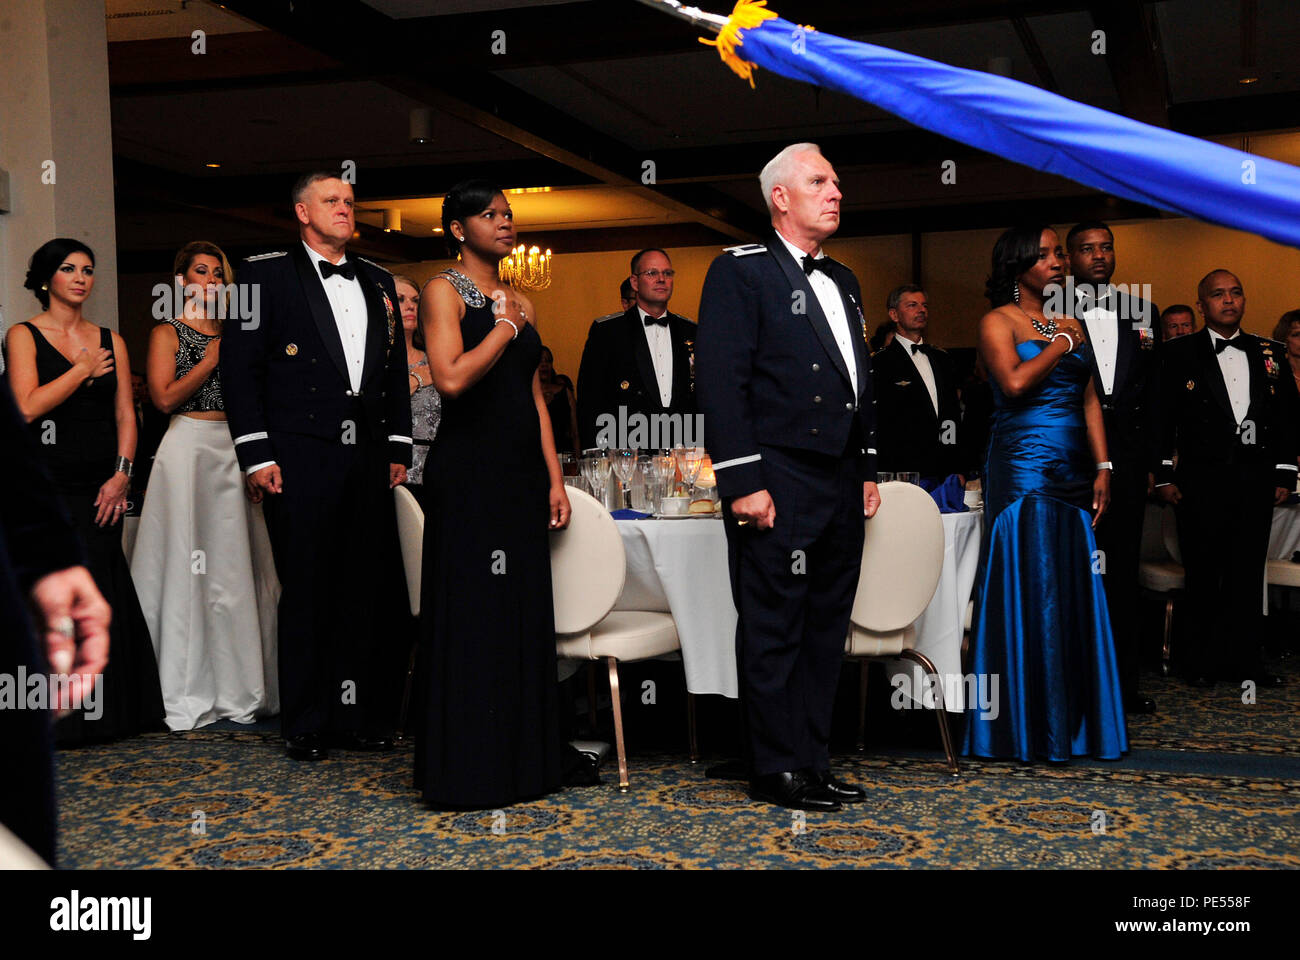 Air Force leaders and guests stand for the singing of both the German and American national anthems during the Air Force Ball, Sept. 12, 2015, at Ramstein Air Base, Germany. The Air Force officially celebrated its 68th birthday as an independent branch Sept. 18, 2015. (U.S. Air Force photo/Airman 1st Class Larissa Greatwood) Stock Photo